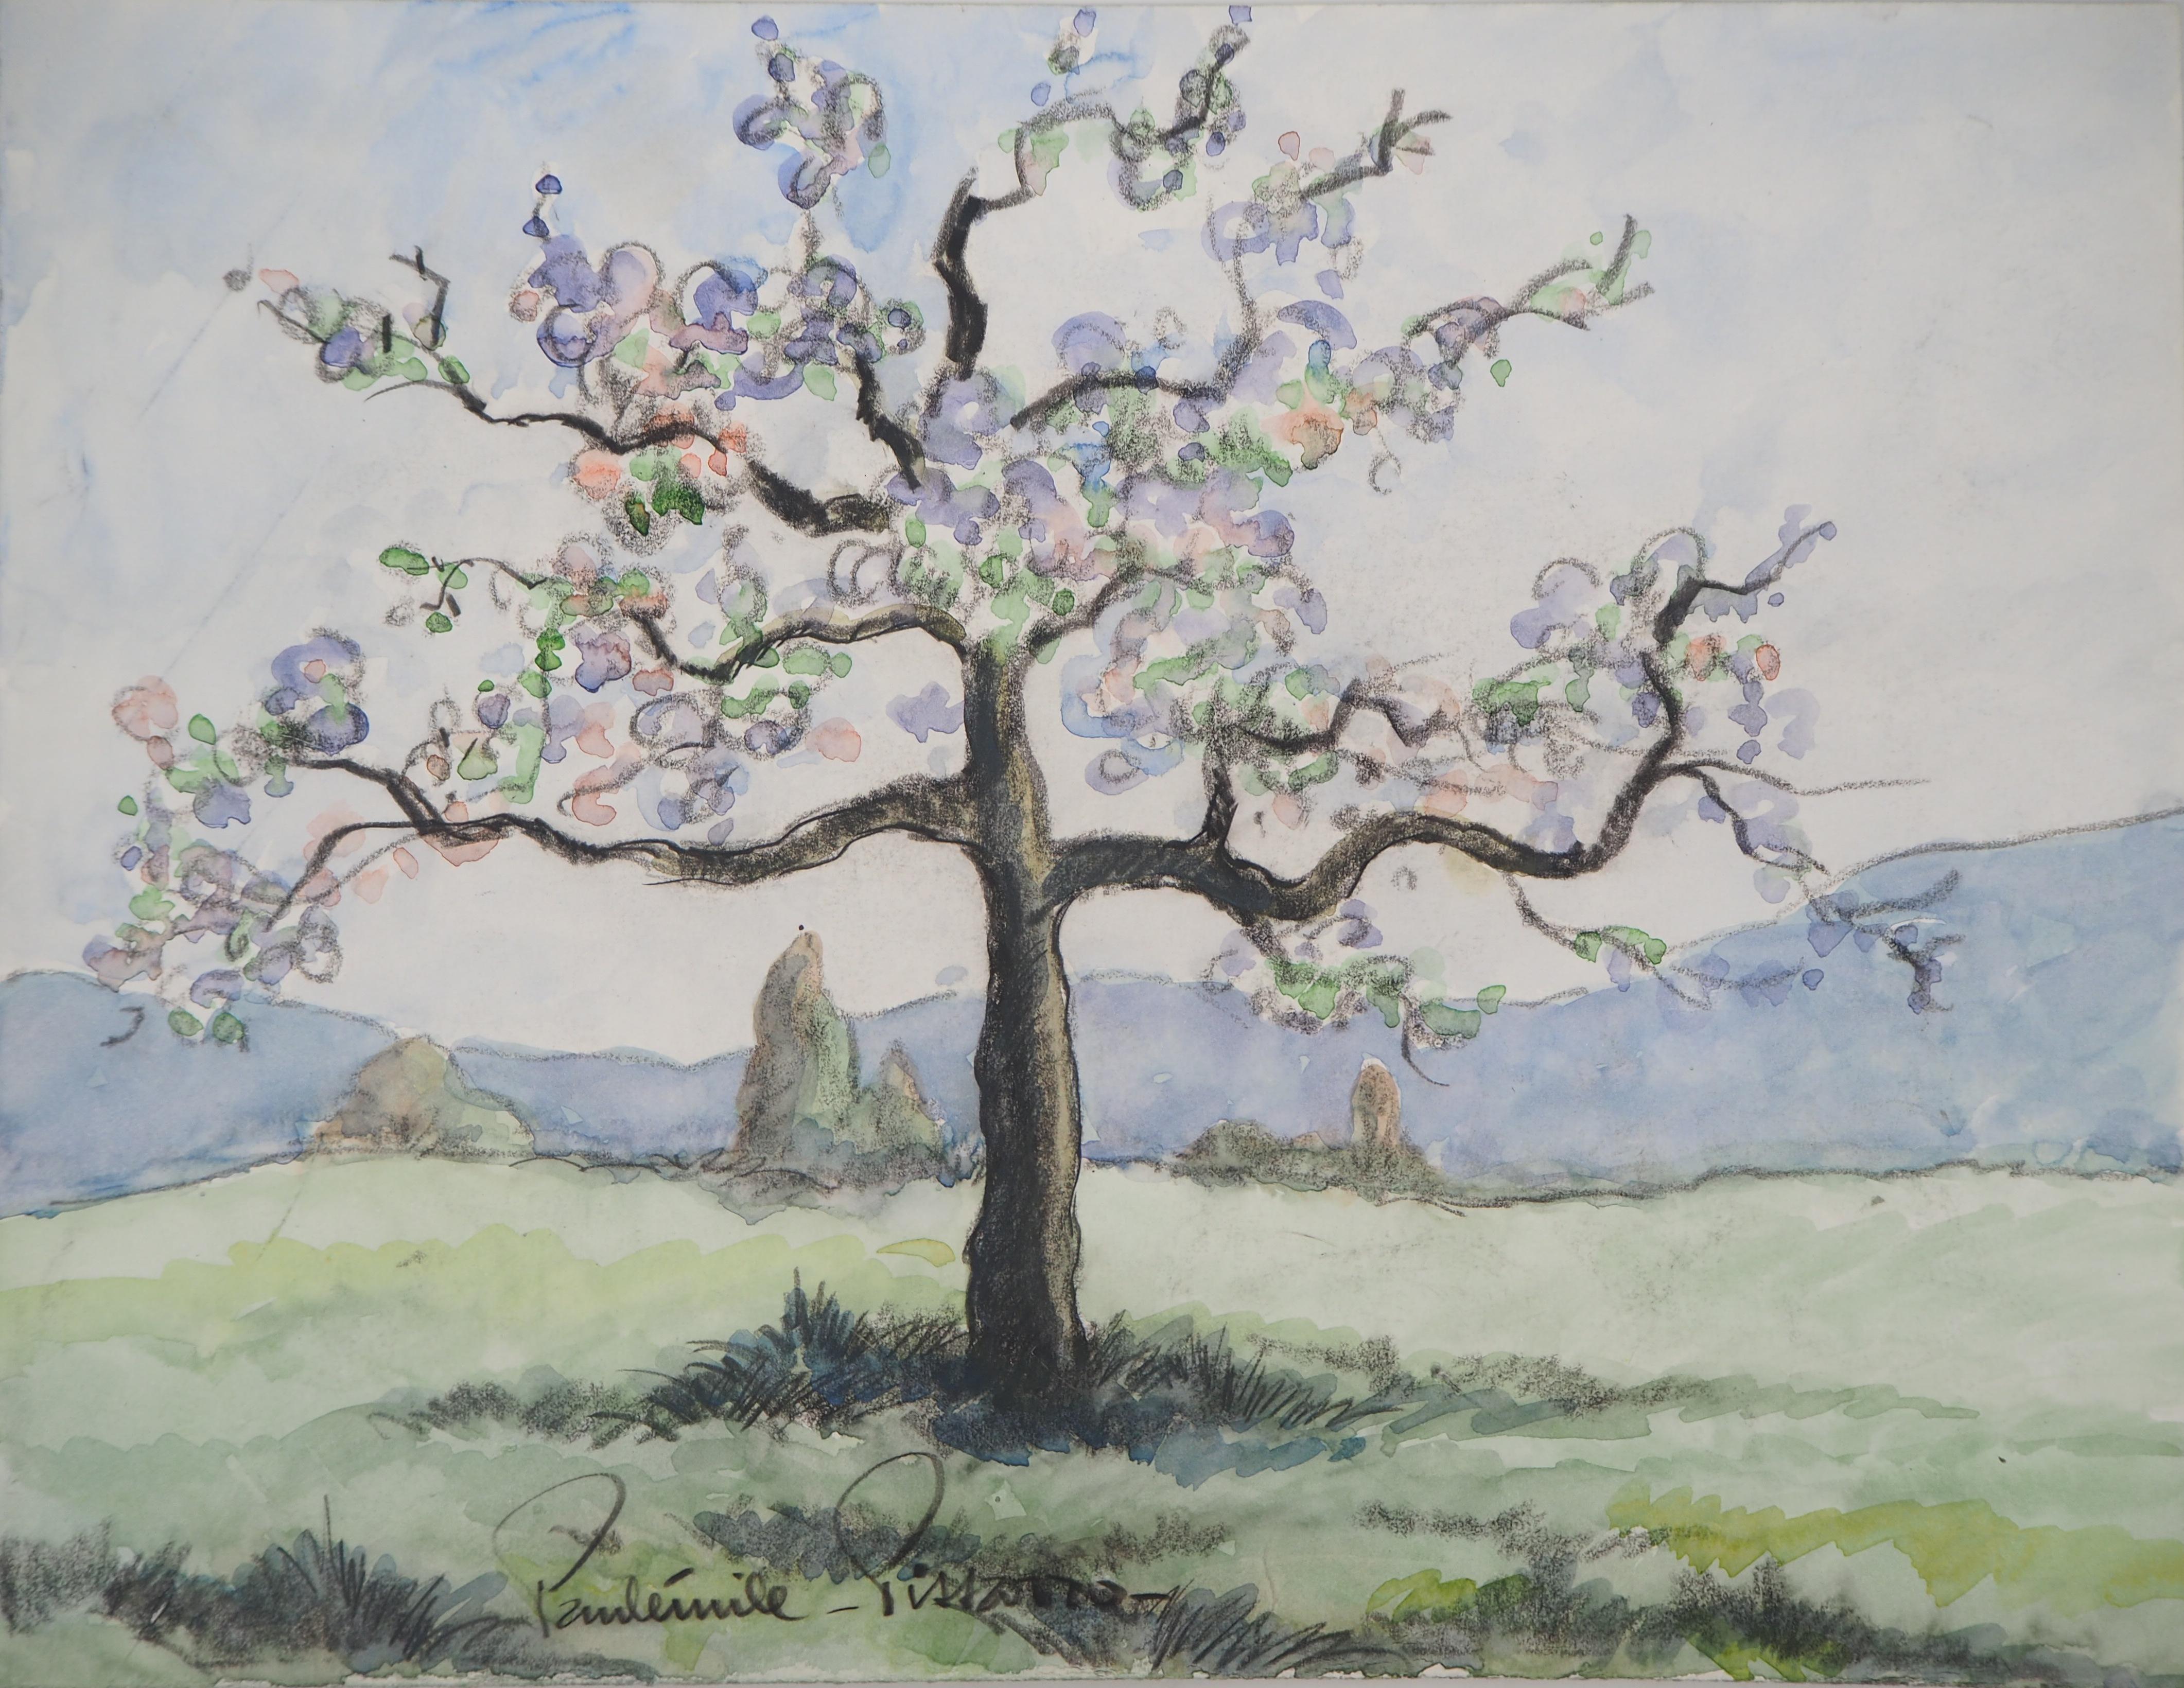 Paul Emile Pissarro Landscape Art - Normandy : Tall Apple Tree in Blossom - Original watercolor painting - Signed